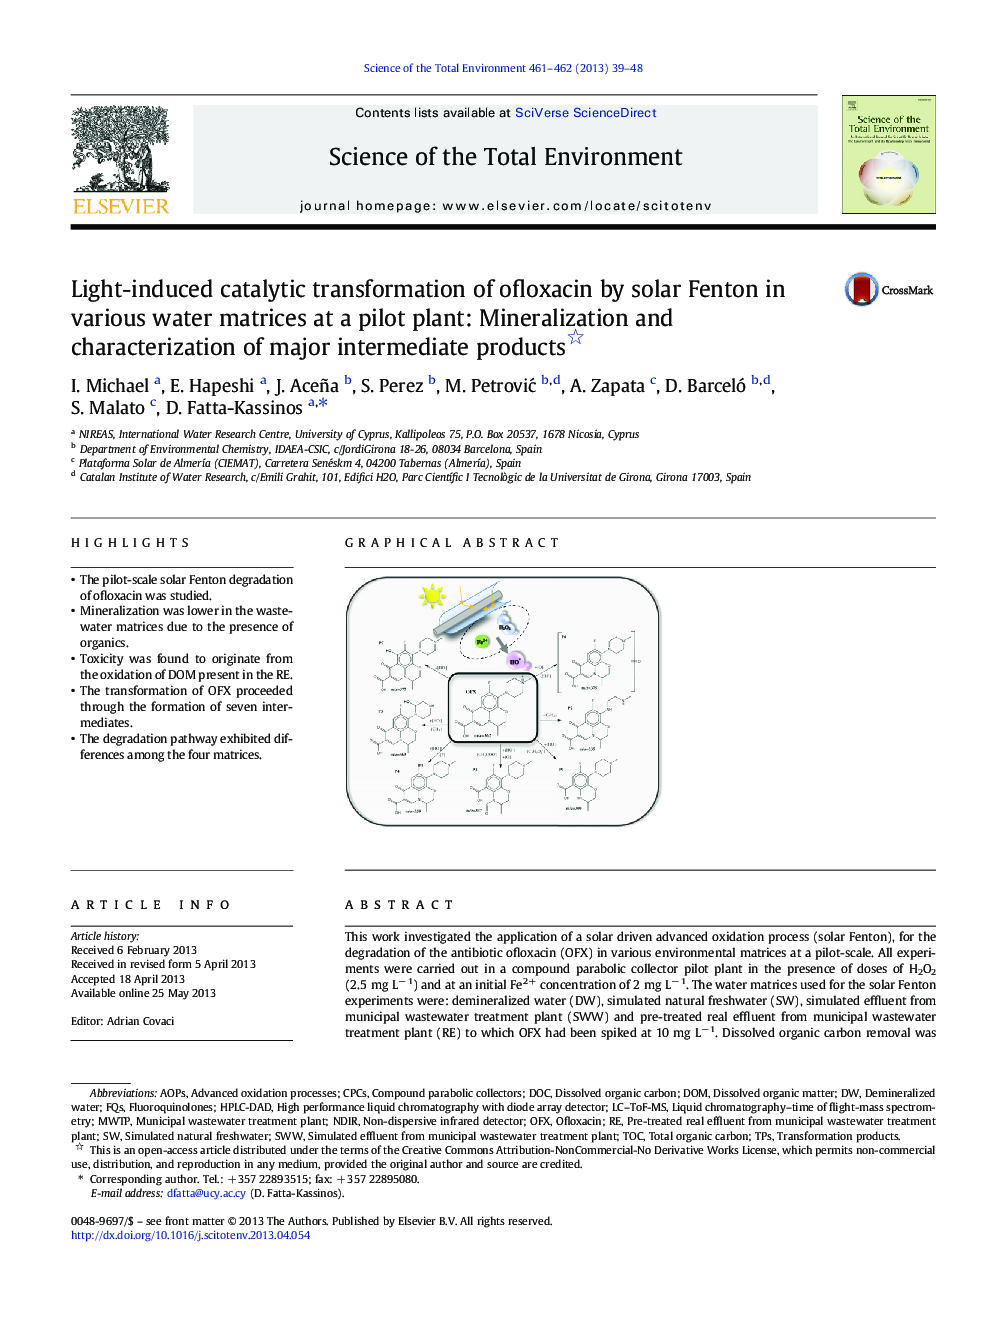 Light-induced catalytic transformation of ofloxacin by solar Fenton in various water matrices at a pilot plant: Mineralization and characterization of major intermediate products